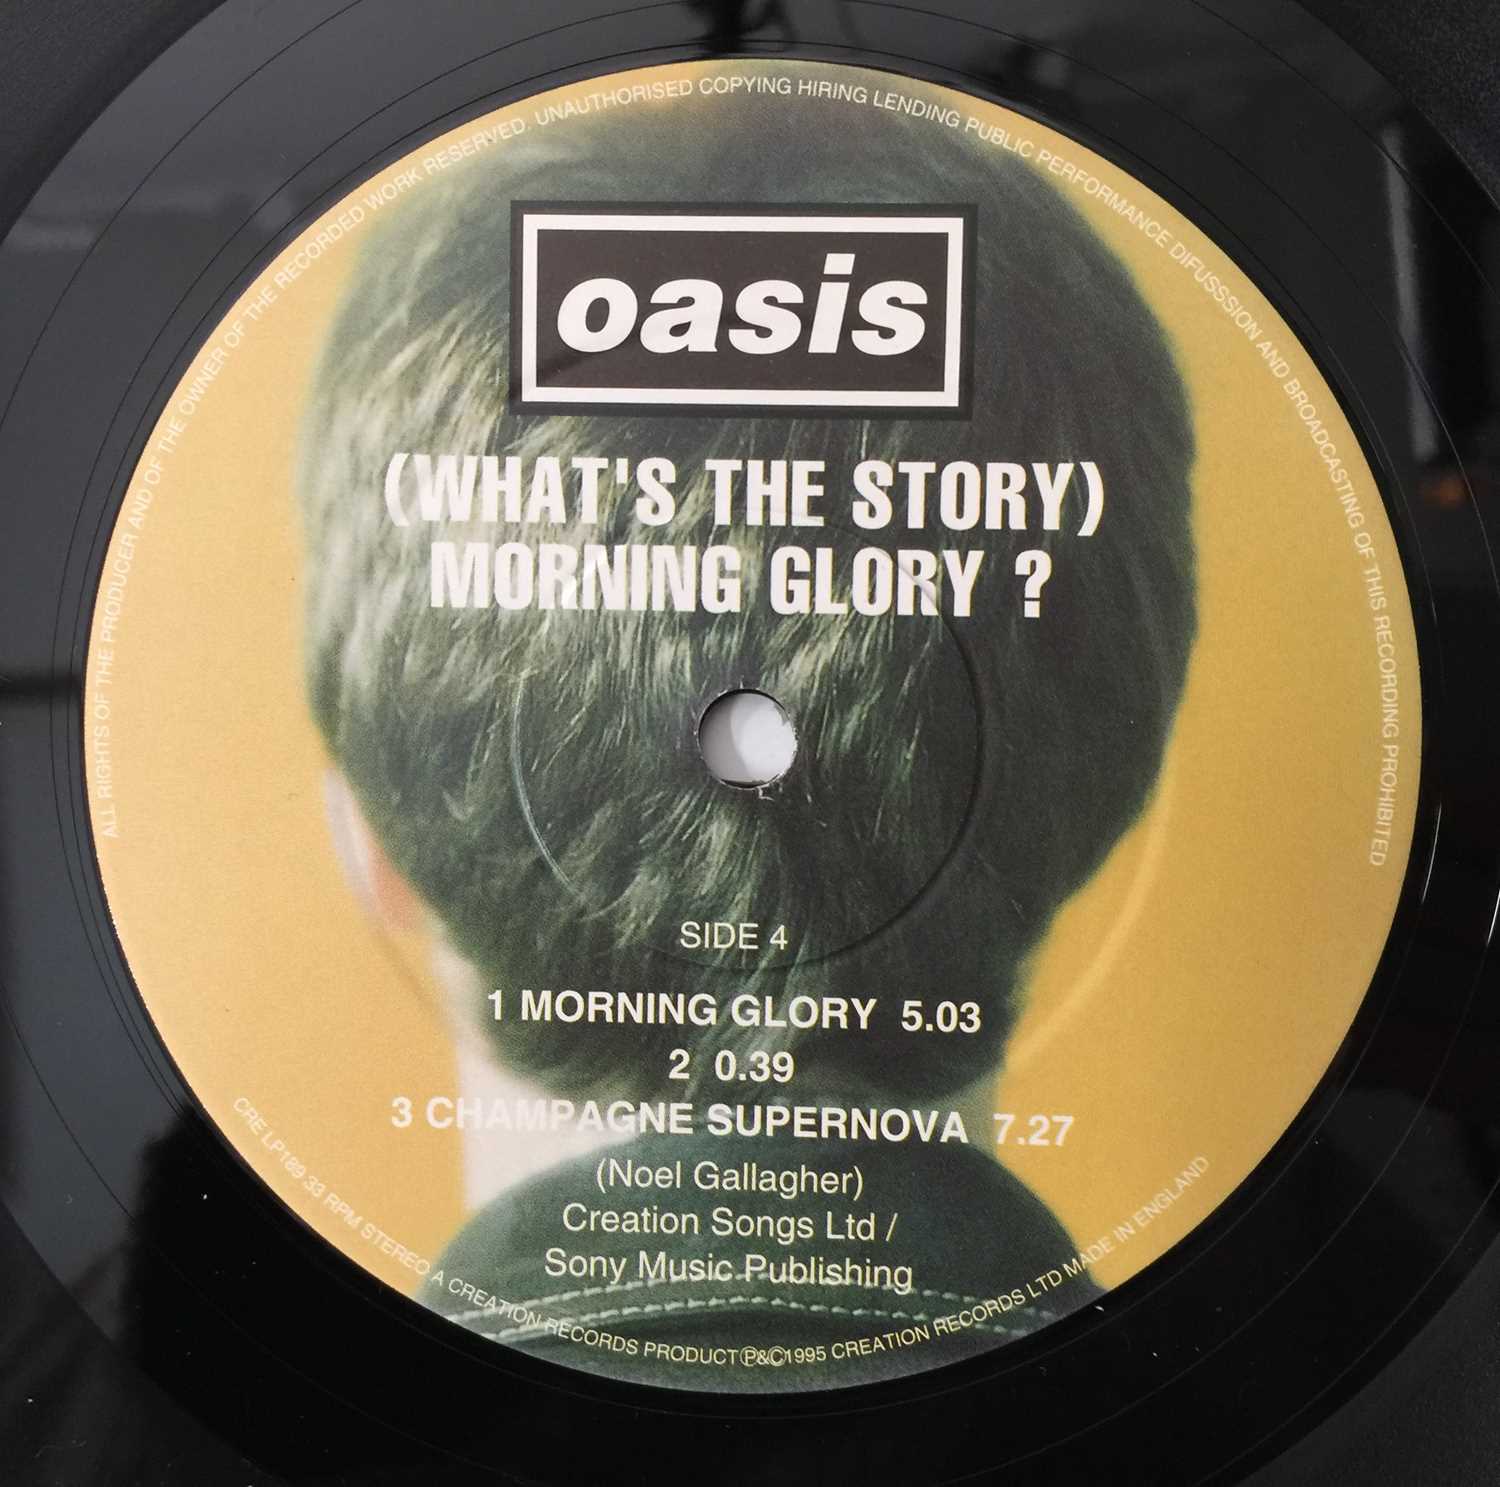 OASIS - (WHAT'S THE STORY) MORNING GLORY? LP (ORIGINAL UK COPY - CREATION CRE LP 189) - Image 4 of 7